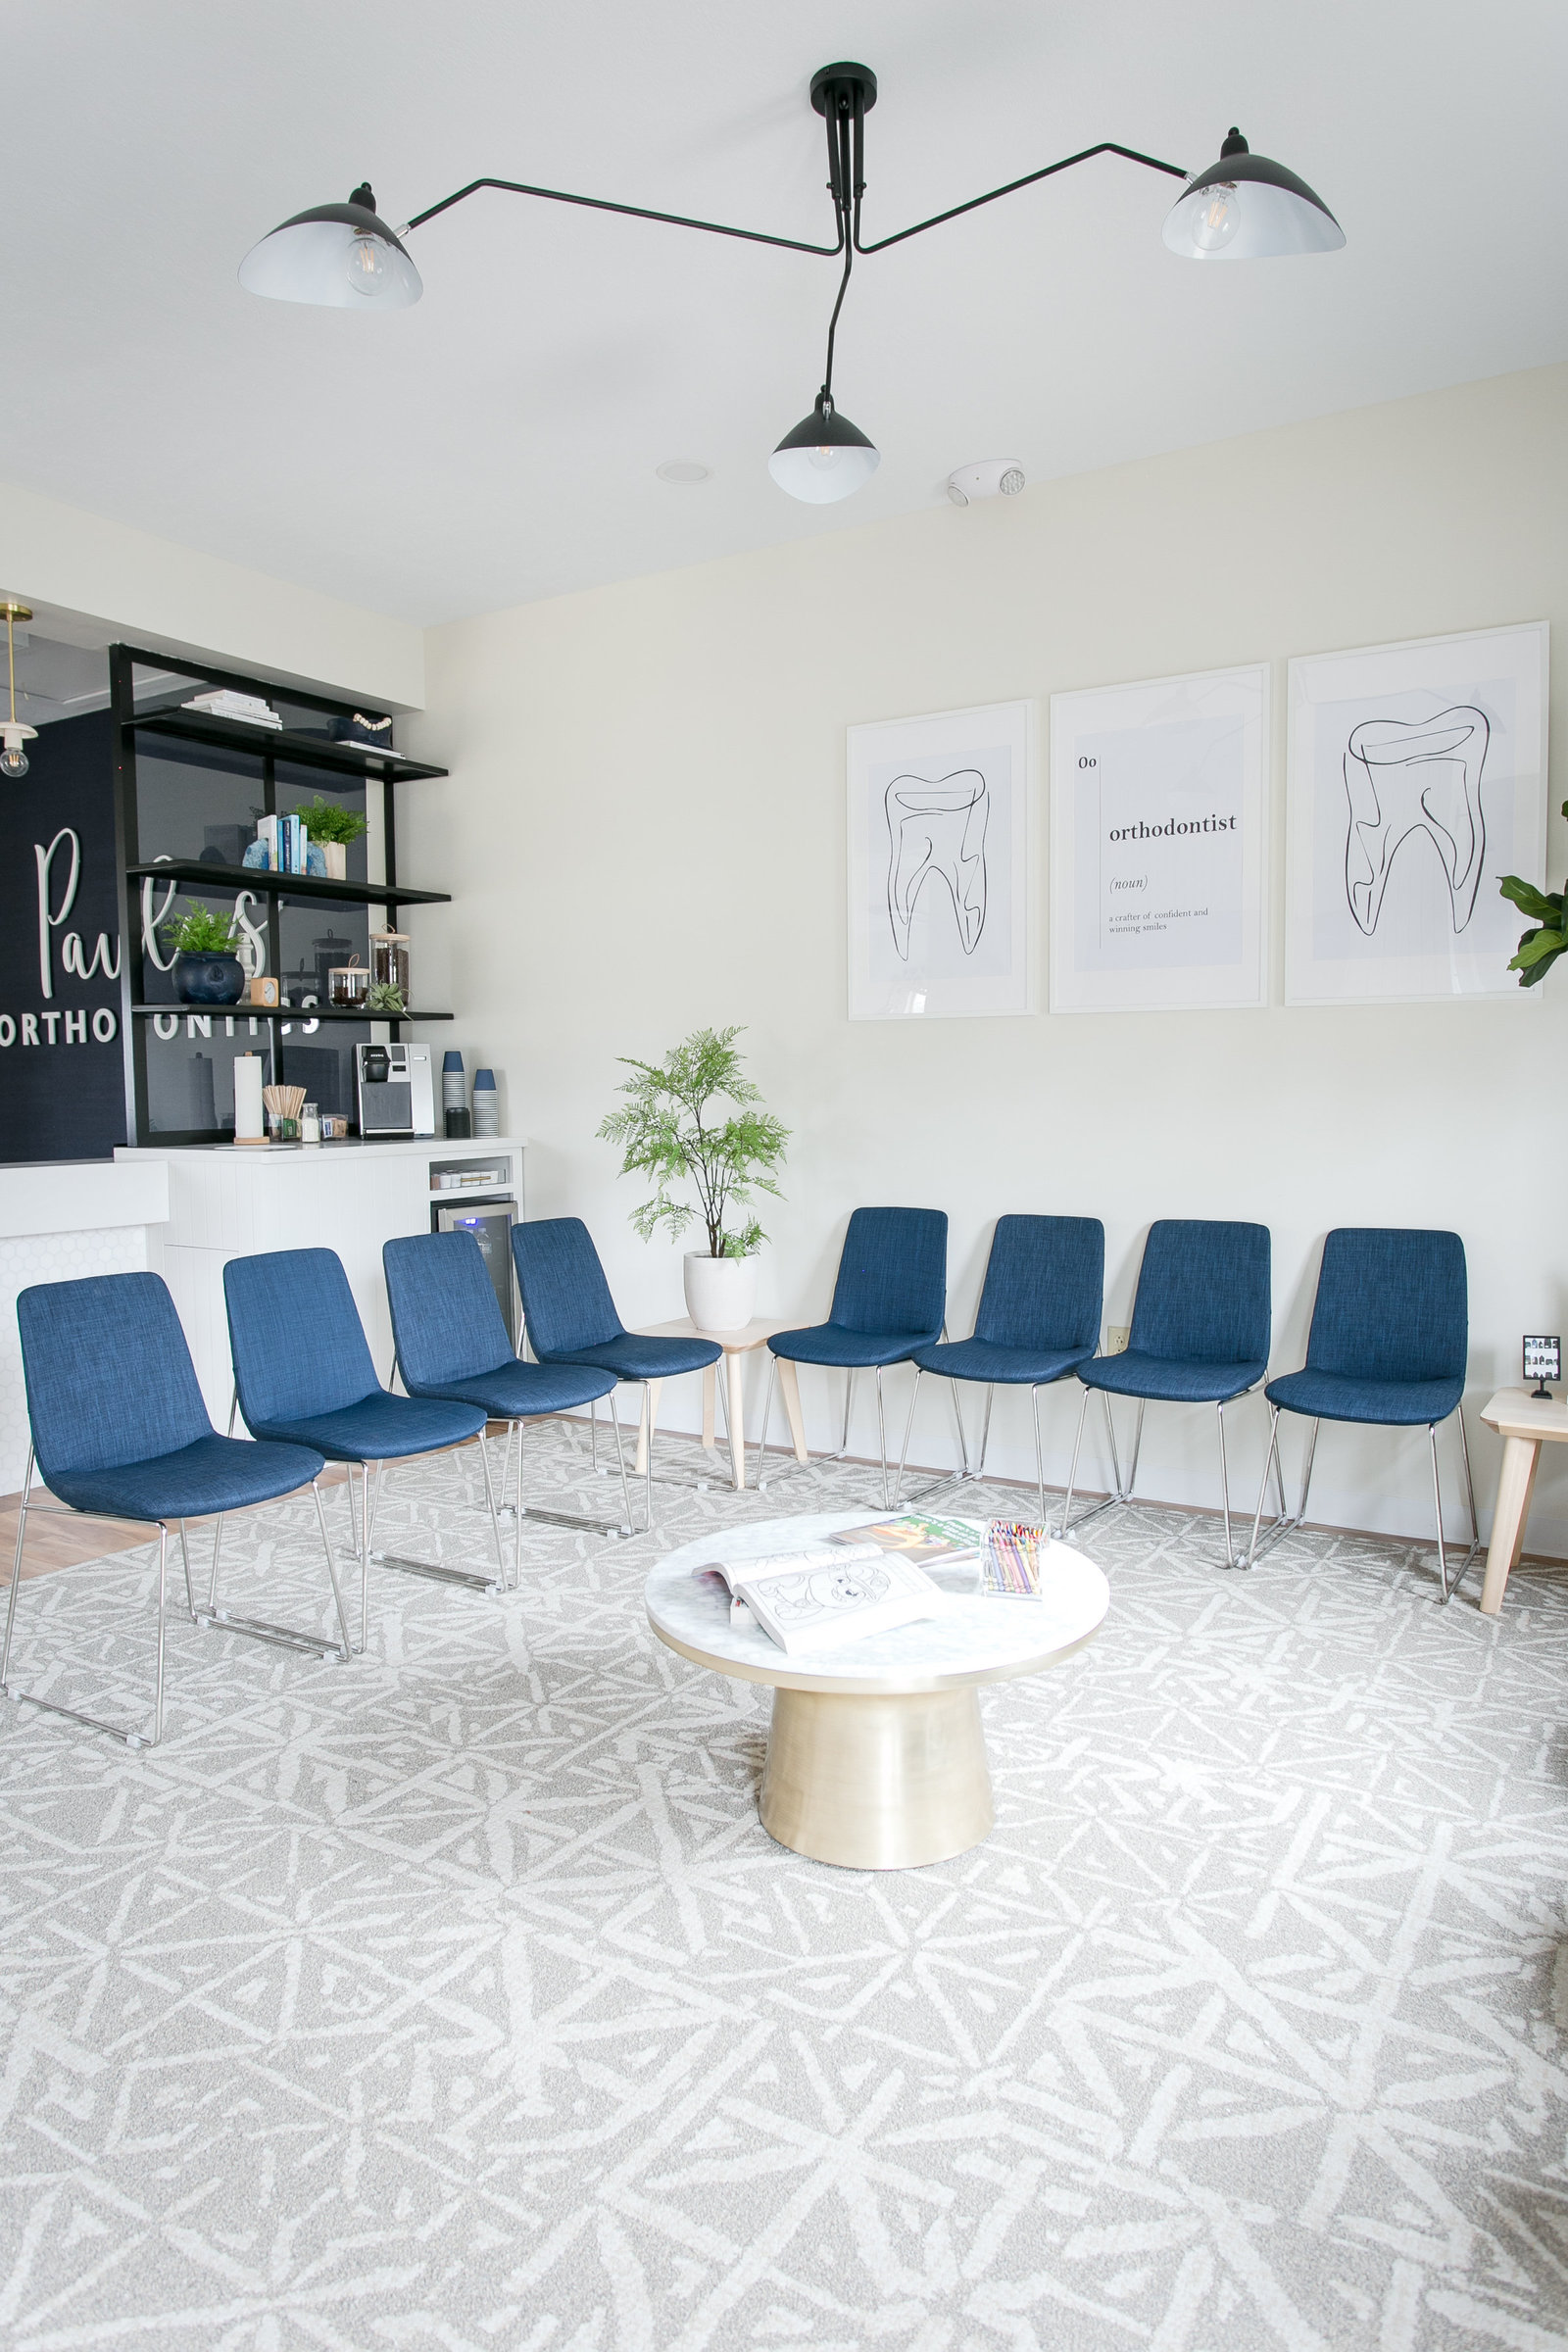 Modern Boutique style Orthodontist waiting room  design